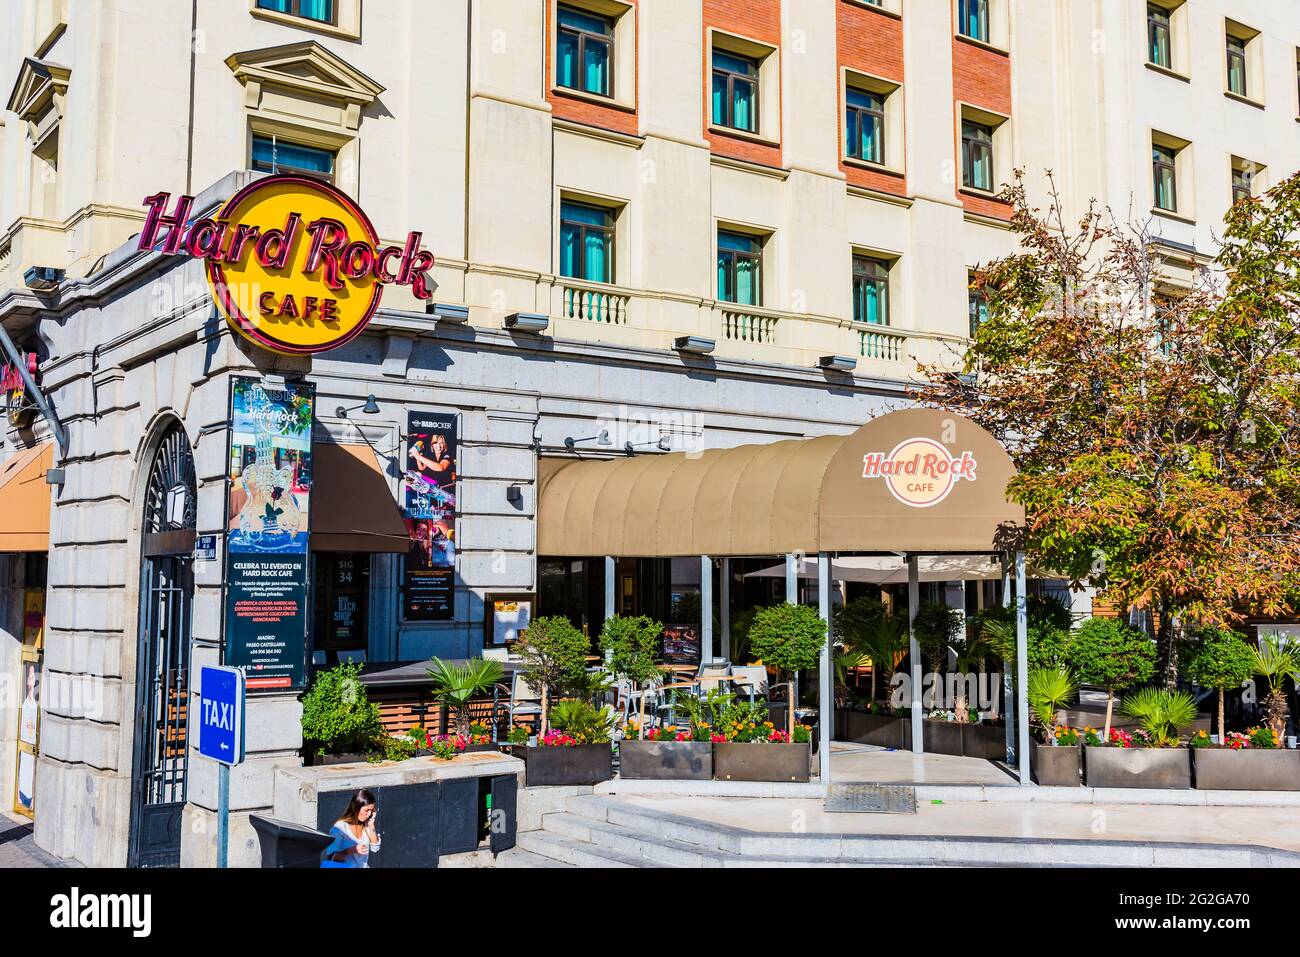 Hard Rock Cafe, Madrid. Hard Rock Cafe, Inc. is a chain of theme restaurants founded in 1971 by Isaac Tigrett and Peter Morton in London. In 1979, the Stock Photo